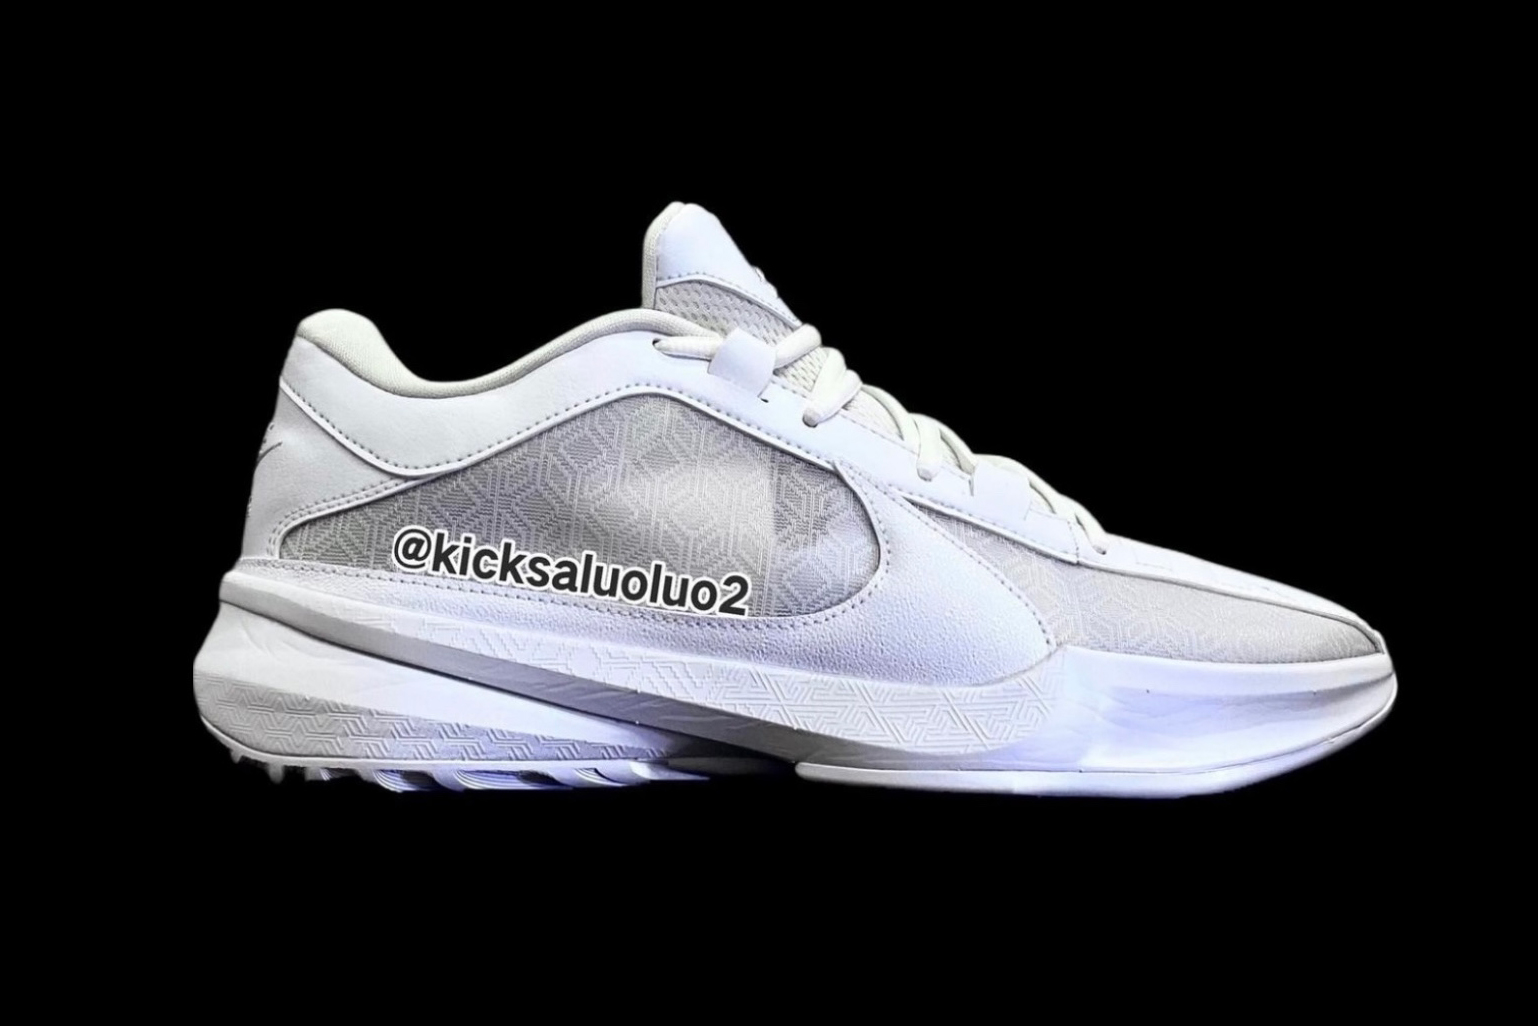 A “White” Nike Zoom Freak 5 Is on the Way